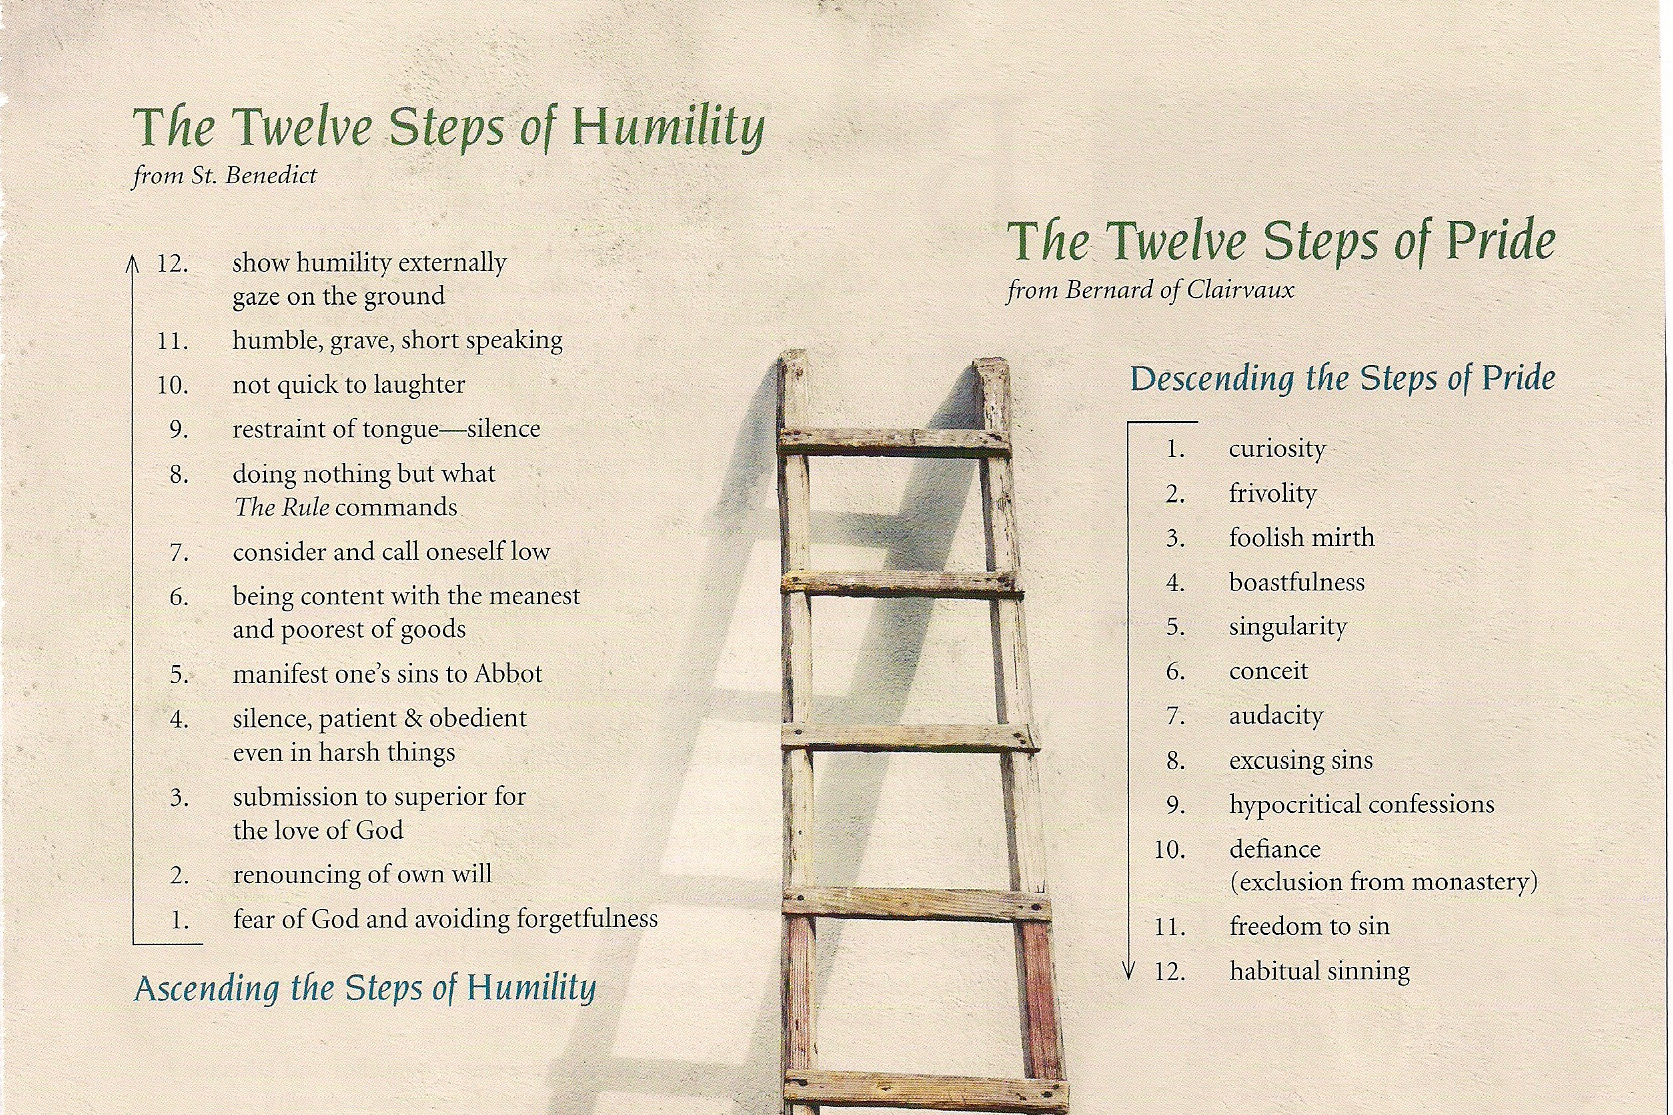 steps-of-humility-and-pride-2